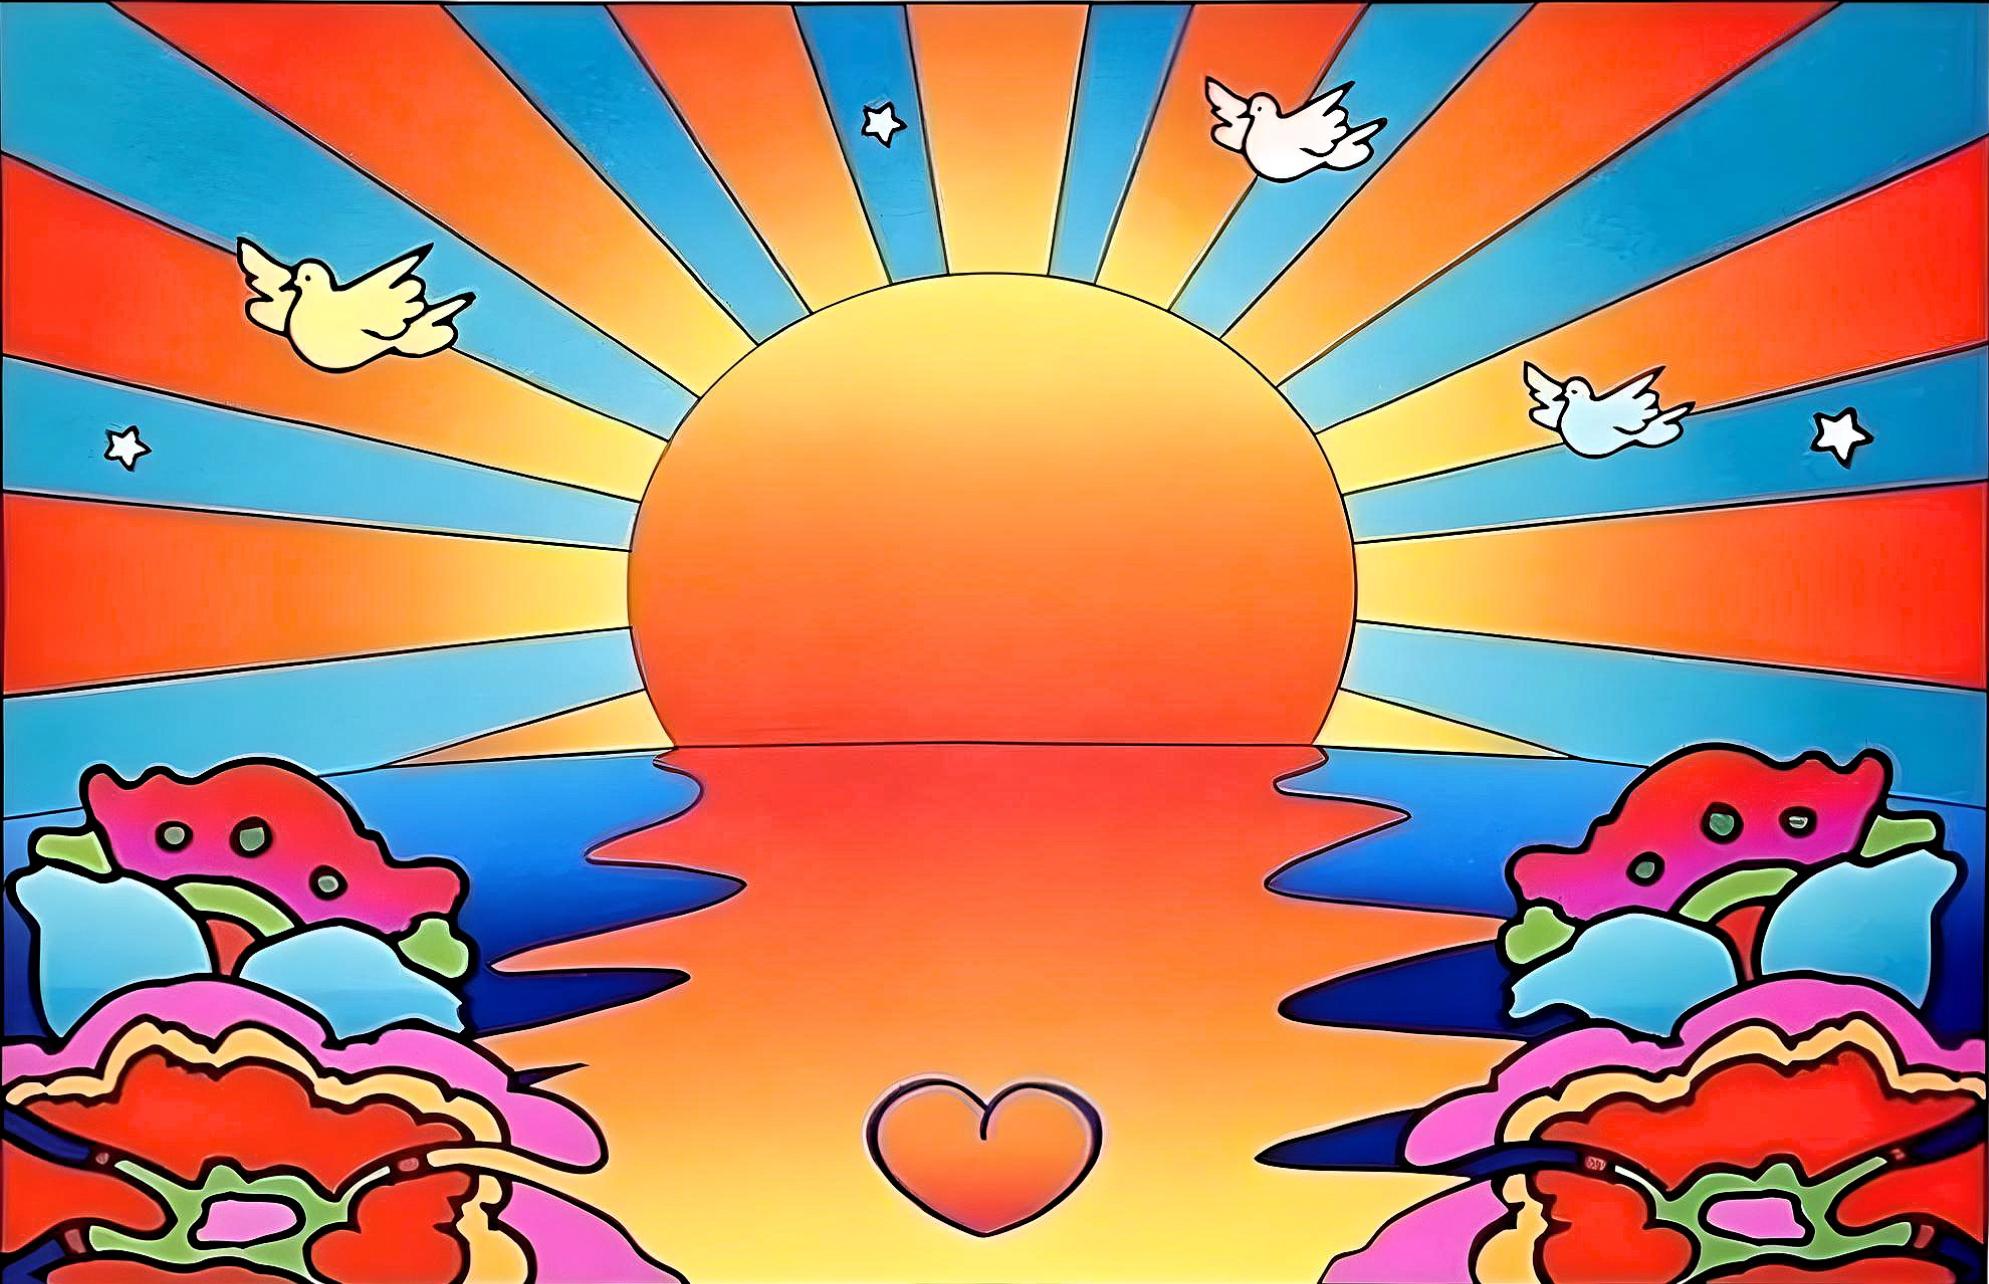 Protect Our Children Ver. II, Peter Max